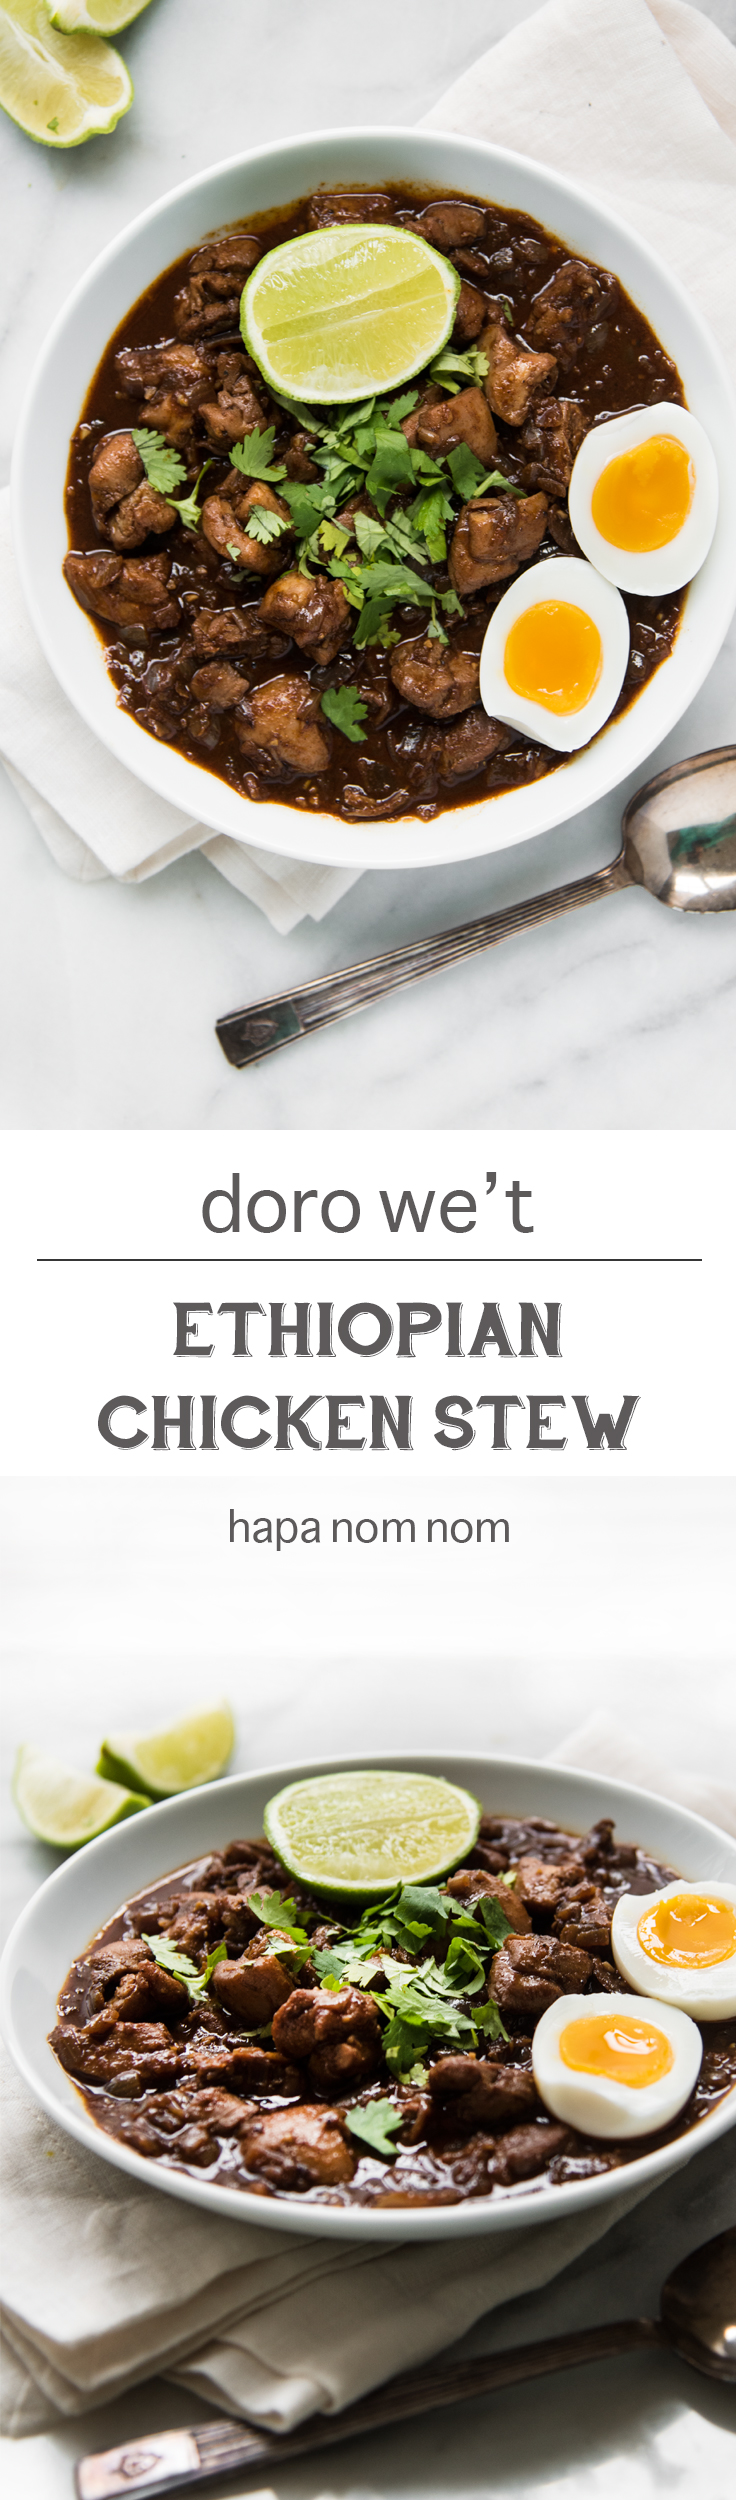 Doro We't is often referred to as the national dish of Ethiopia - it has layers of flavor, complex heat, and absolutely delicious